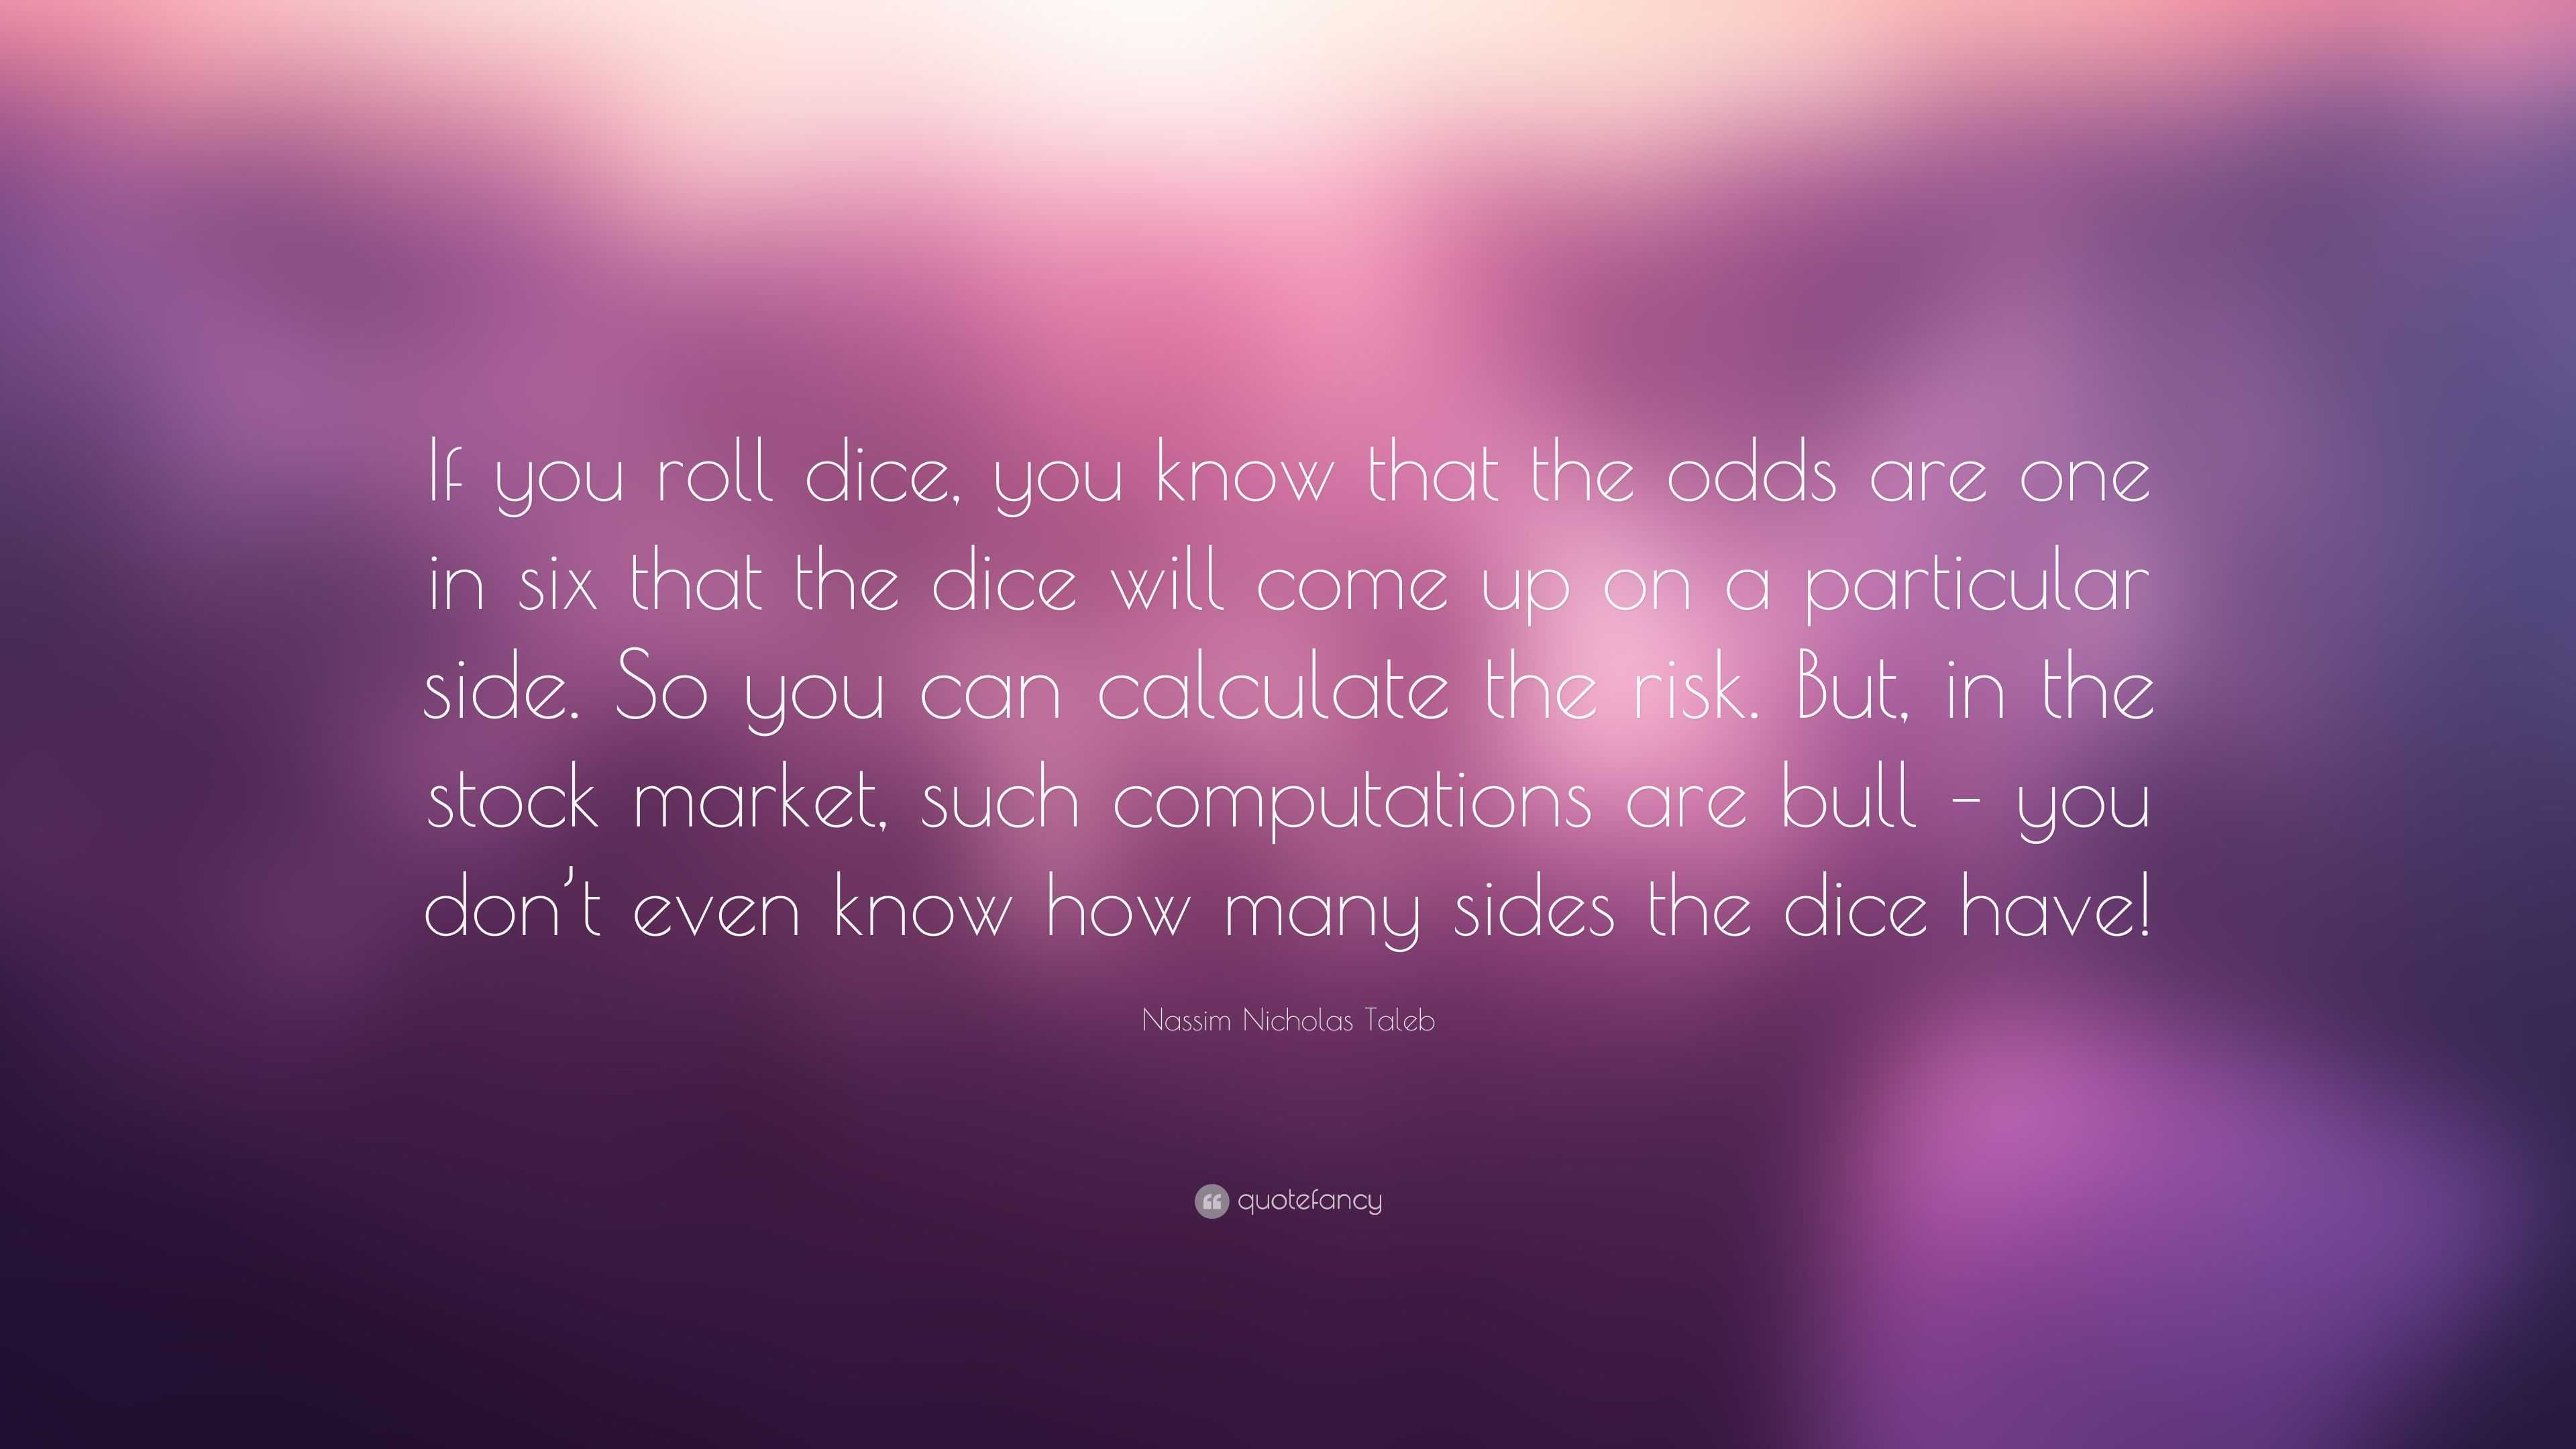 Nassim Nicholas Taleb Quote: “If you roll dice, you know that the odds ...